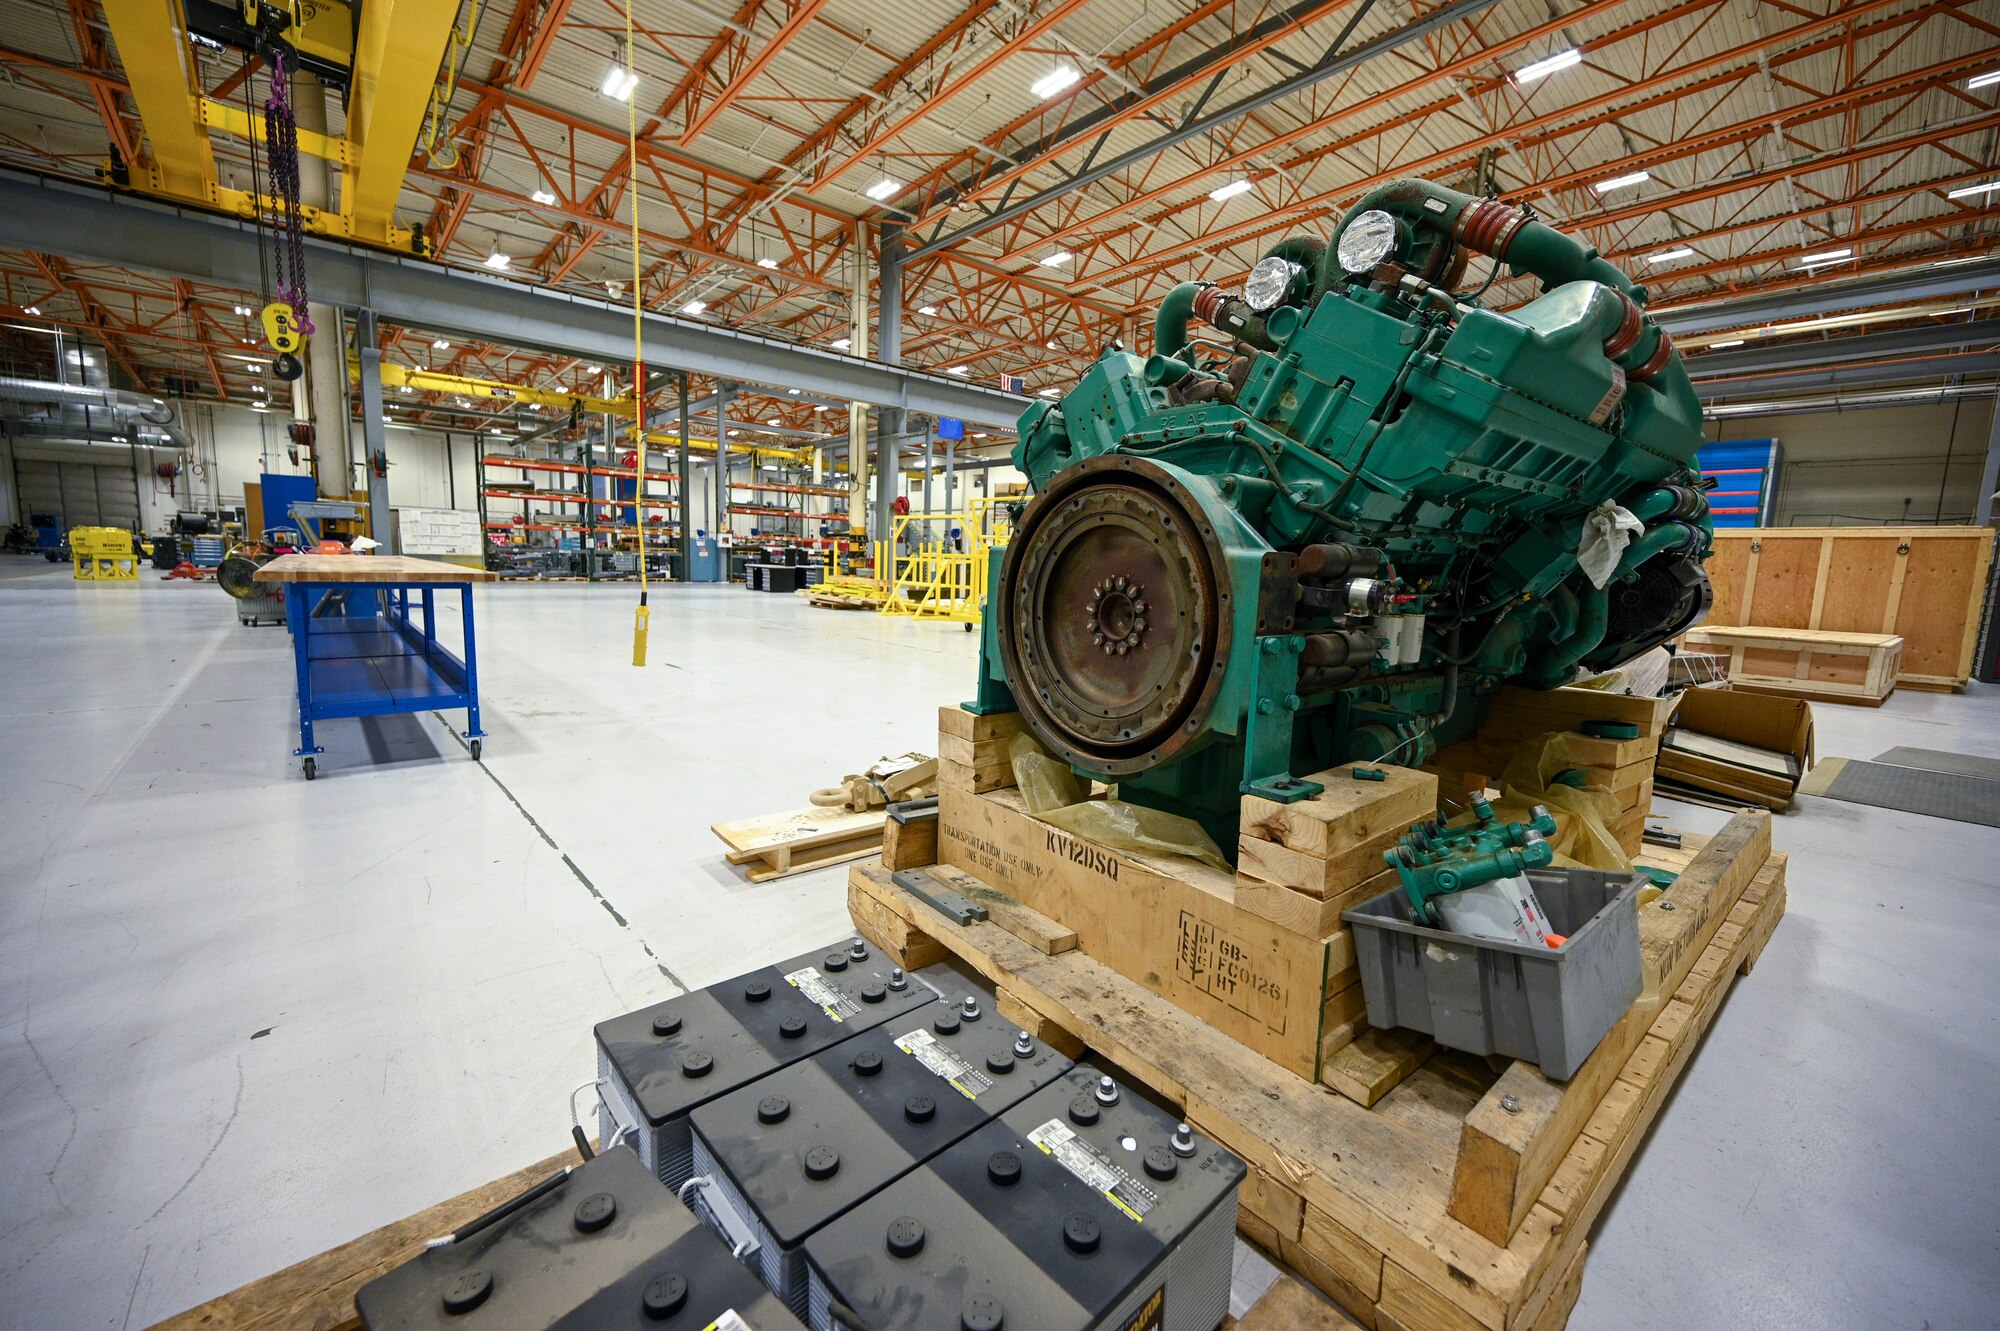 The engine from a Base Expeditionary Airfield Resources (BEAR) power unit sits inside a newly designed work space at Hill Air Force Base, Utah, April 26, 2022. The 526th EMXS activated a new maintenance workload on BEAR units after successfully testing the unit's first repaired asset. BEAR power units are used to power U.S. Air Force forward operating bases. (U.S. Air Force photo by R. Nial Bradshaw)